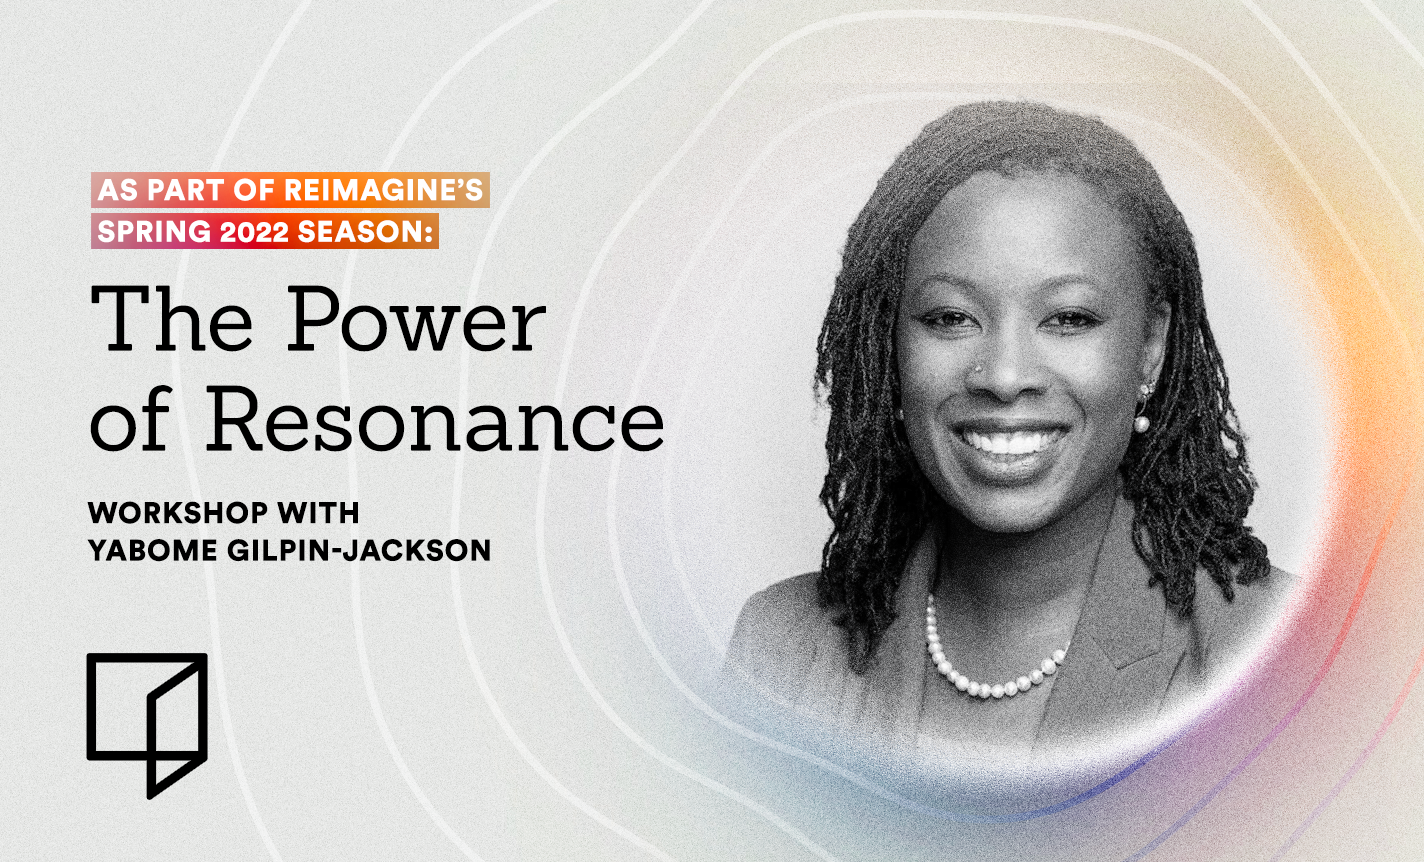 The Power of Resonance: Workshop with Yabome Gilpin-Jackson